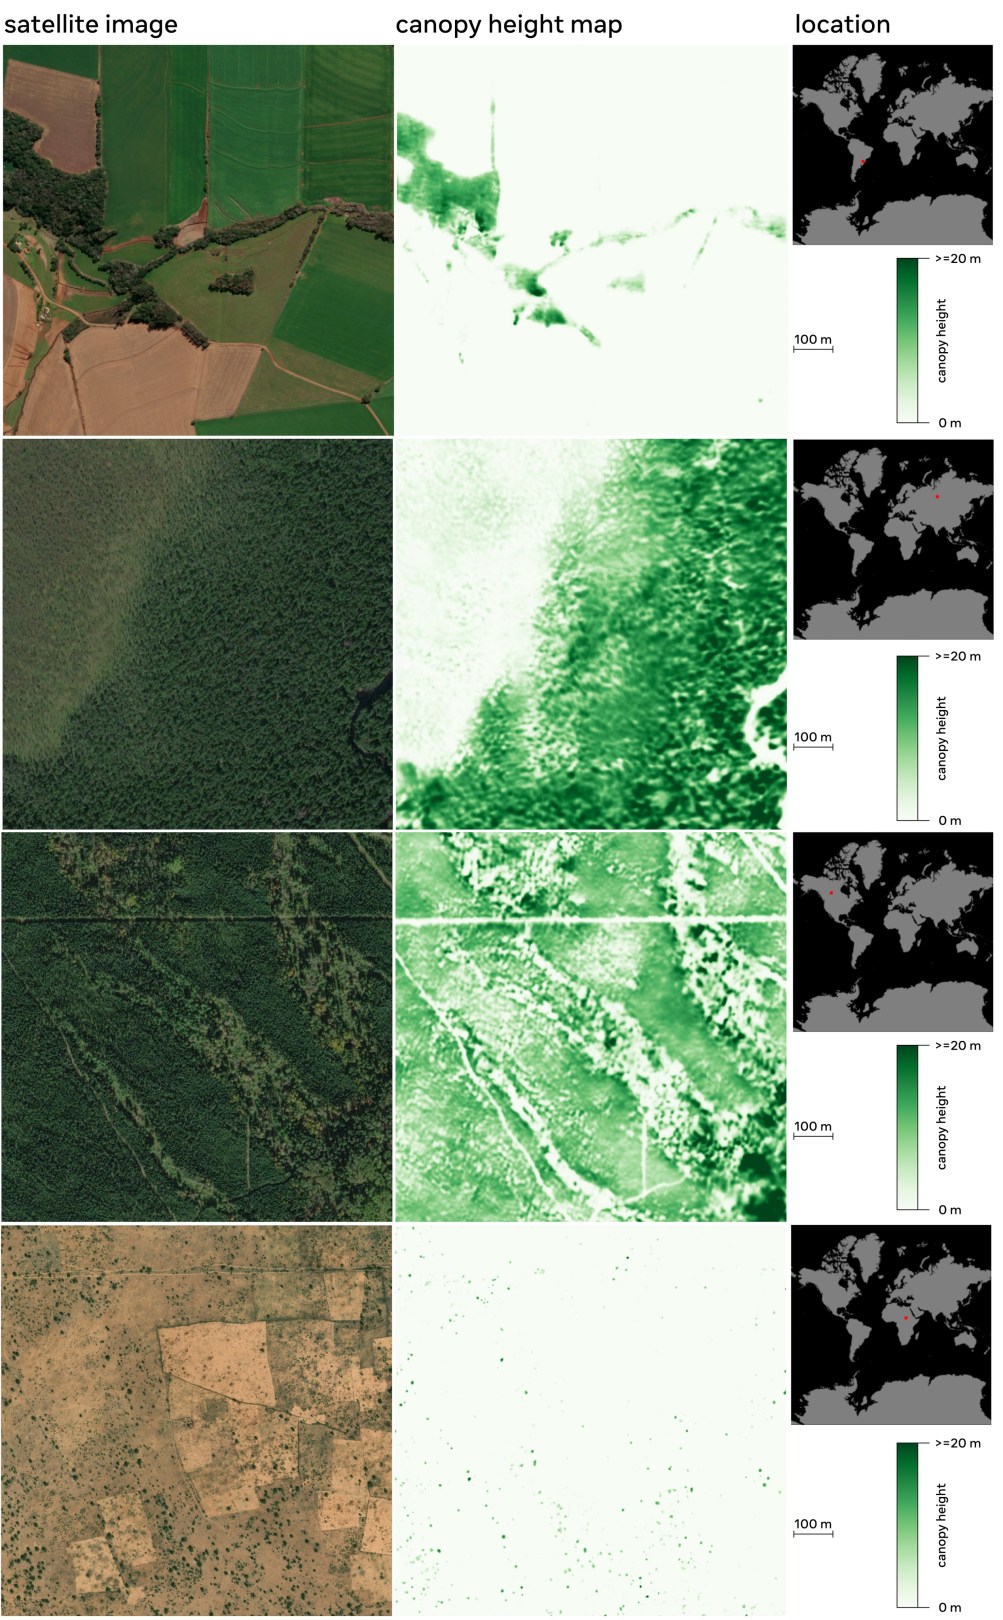 Examples of the canopy height maps on four different continents. The left panel shows the satellite image (from Maxar Technologies), the middle panel shows the predicted canopy height, and a red dot in the right panel indicates the location where the analysis was done.